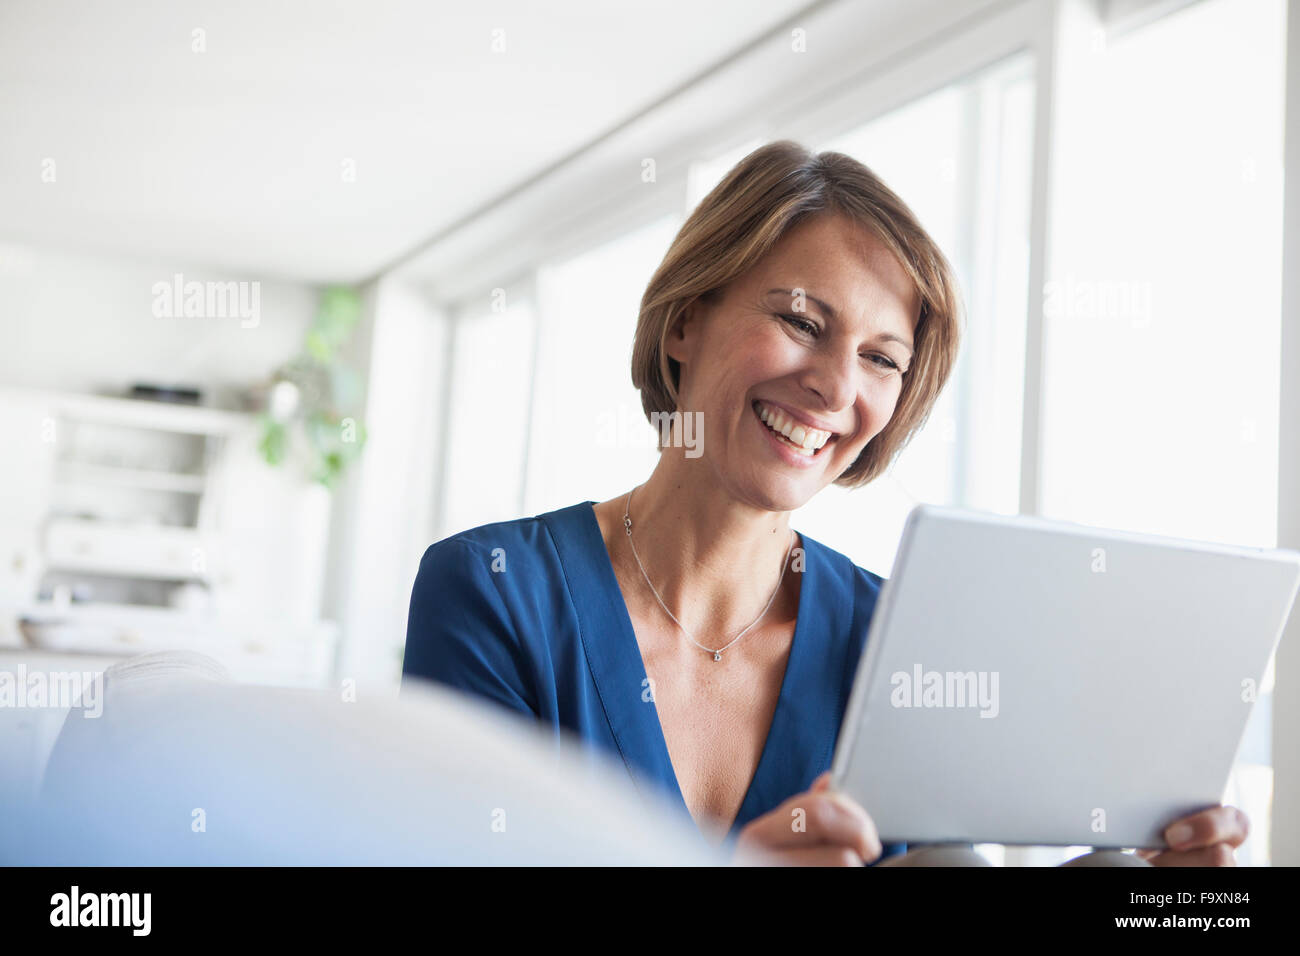 Smiling woman at home using digital tablet Banque D'Images